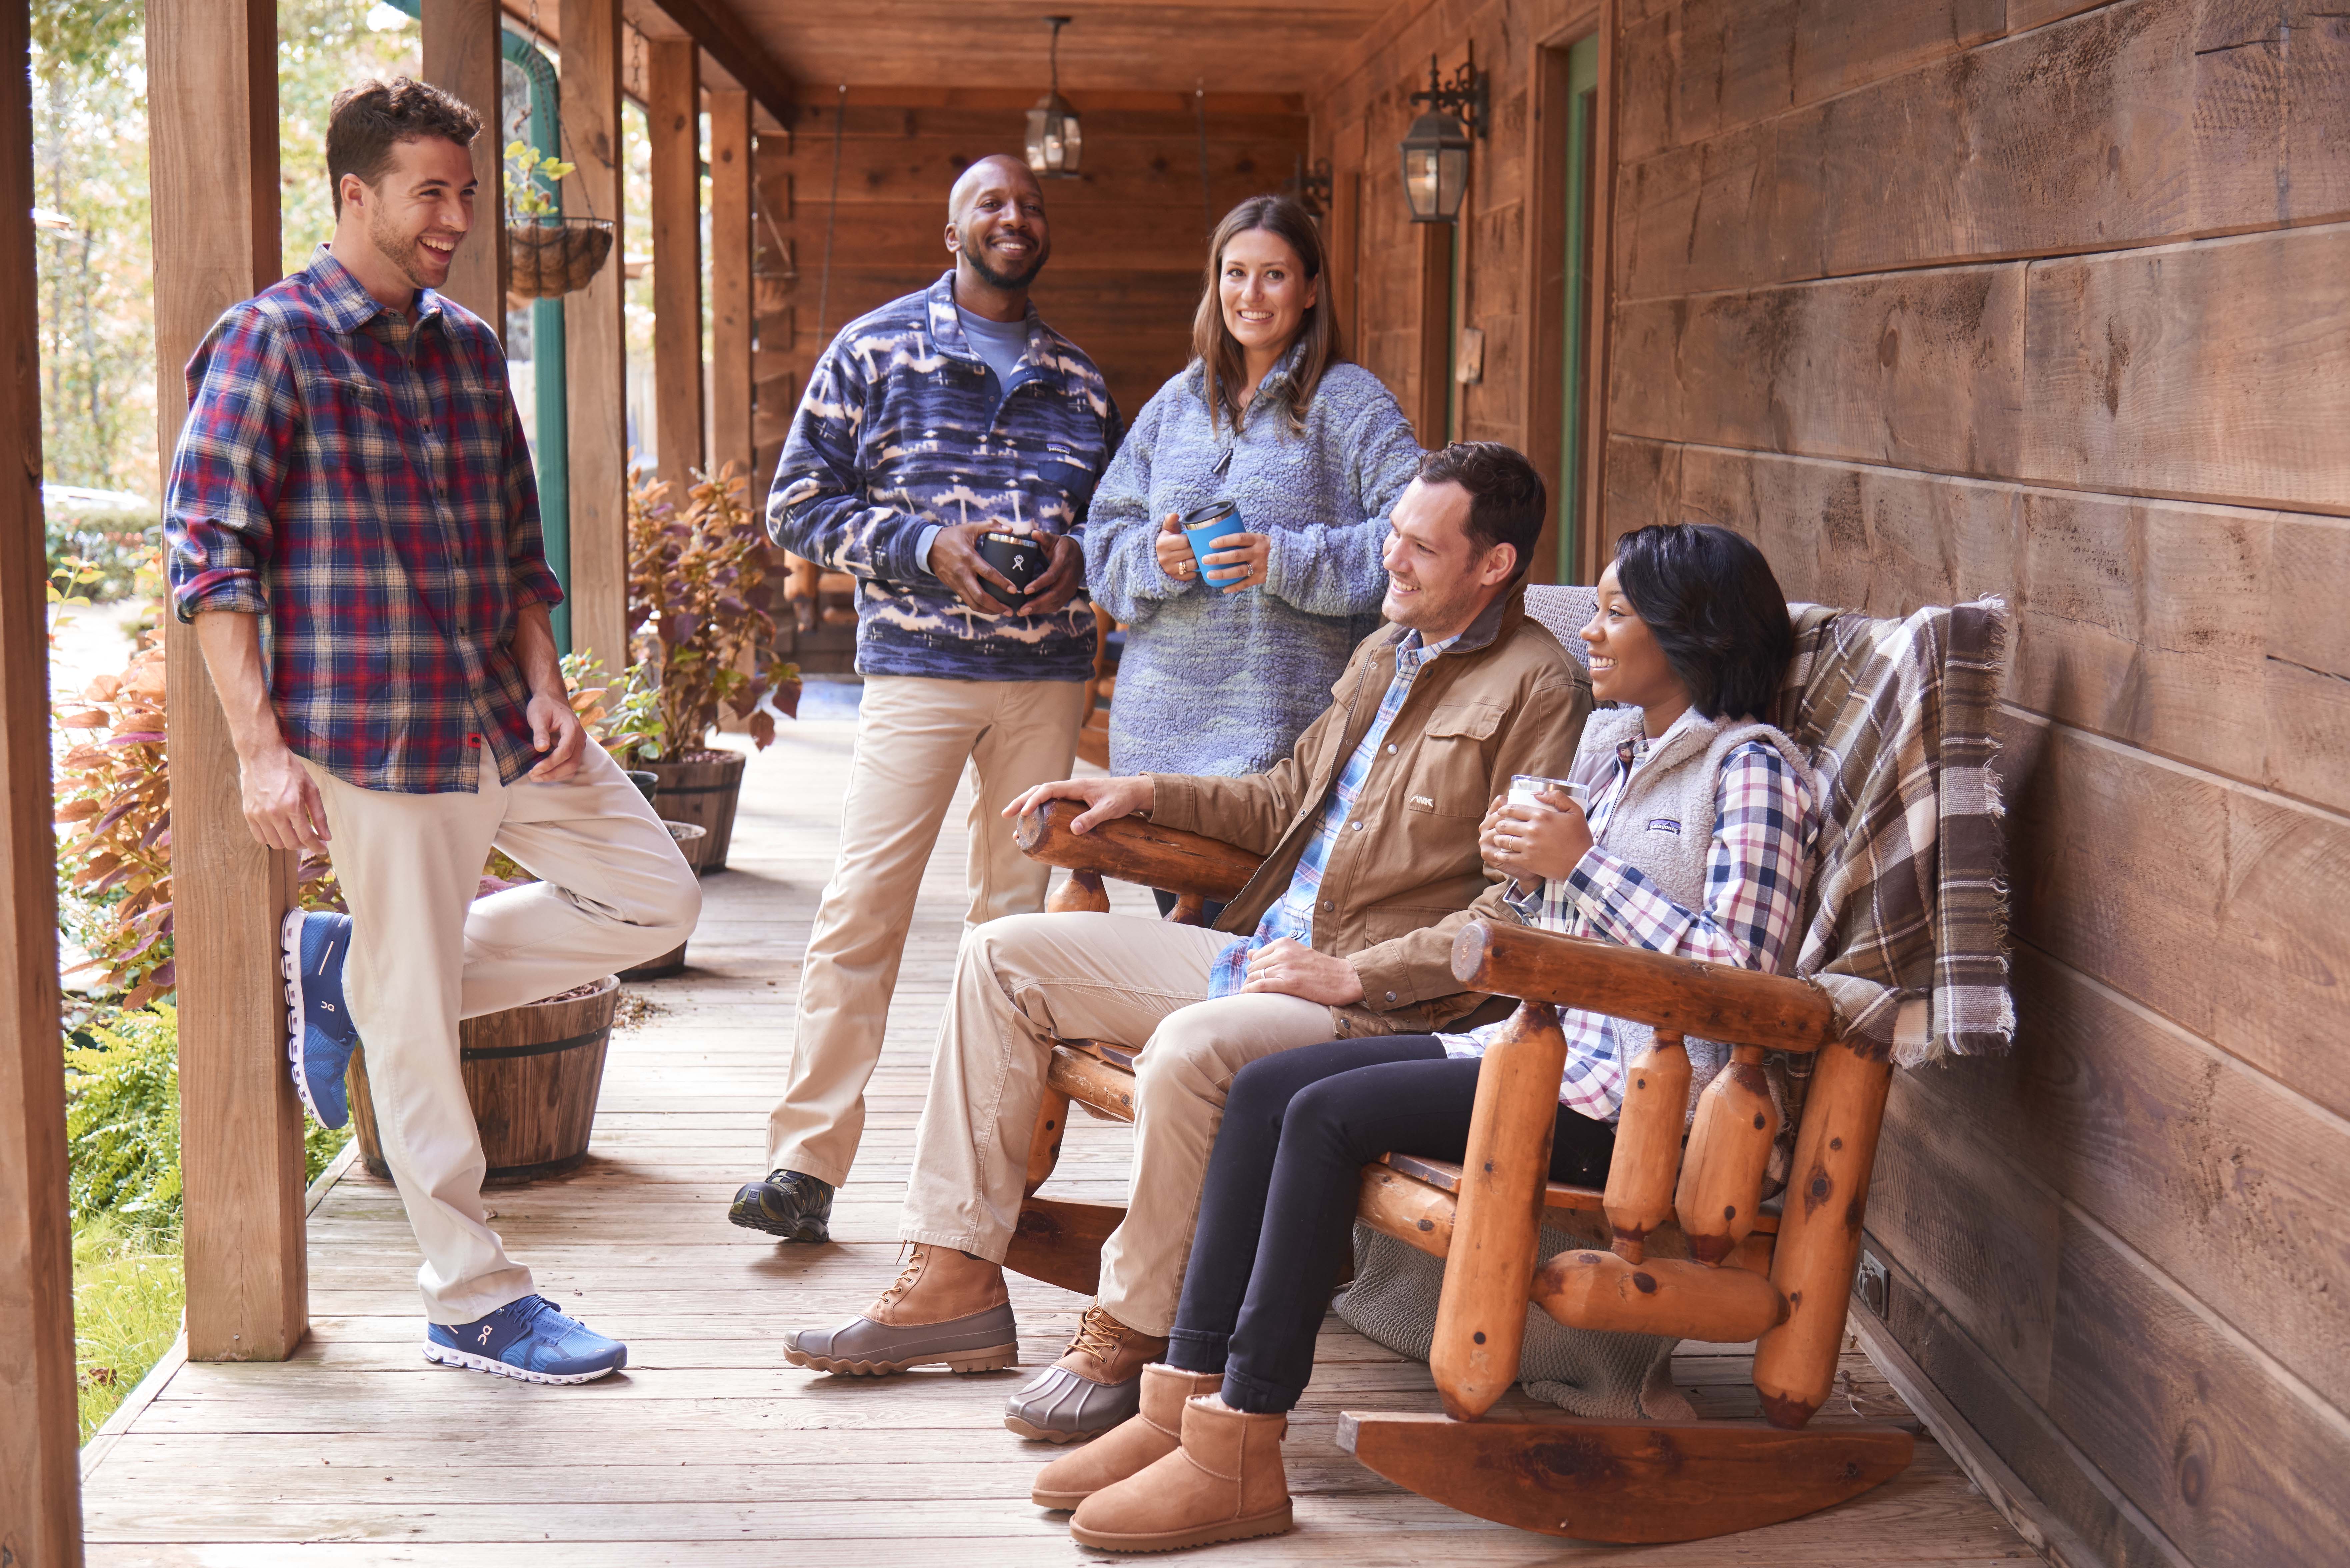 Friends relax on porch of cozy cabin.